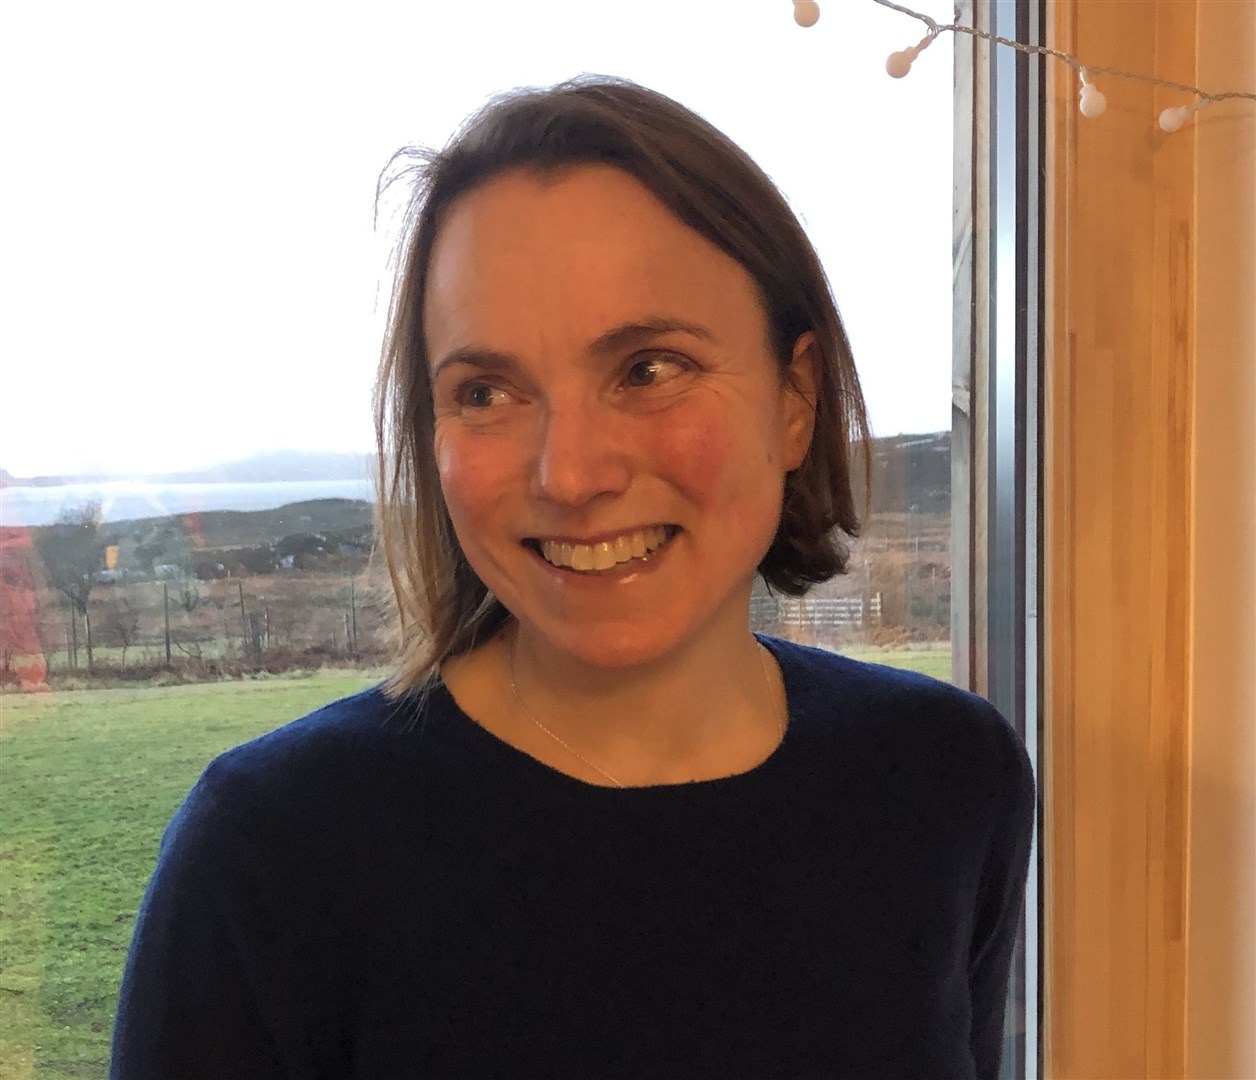 Coigach based Lizzie Williams has been appointed to coordinate the project which is in the development phase.